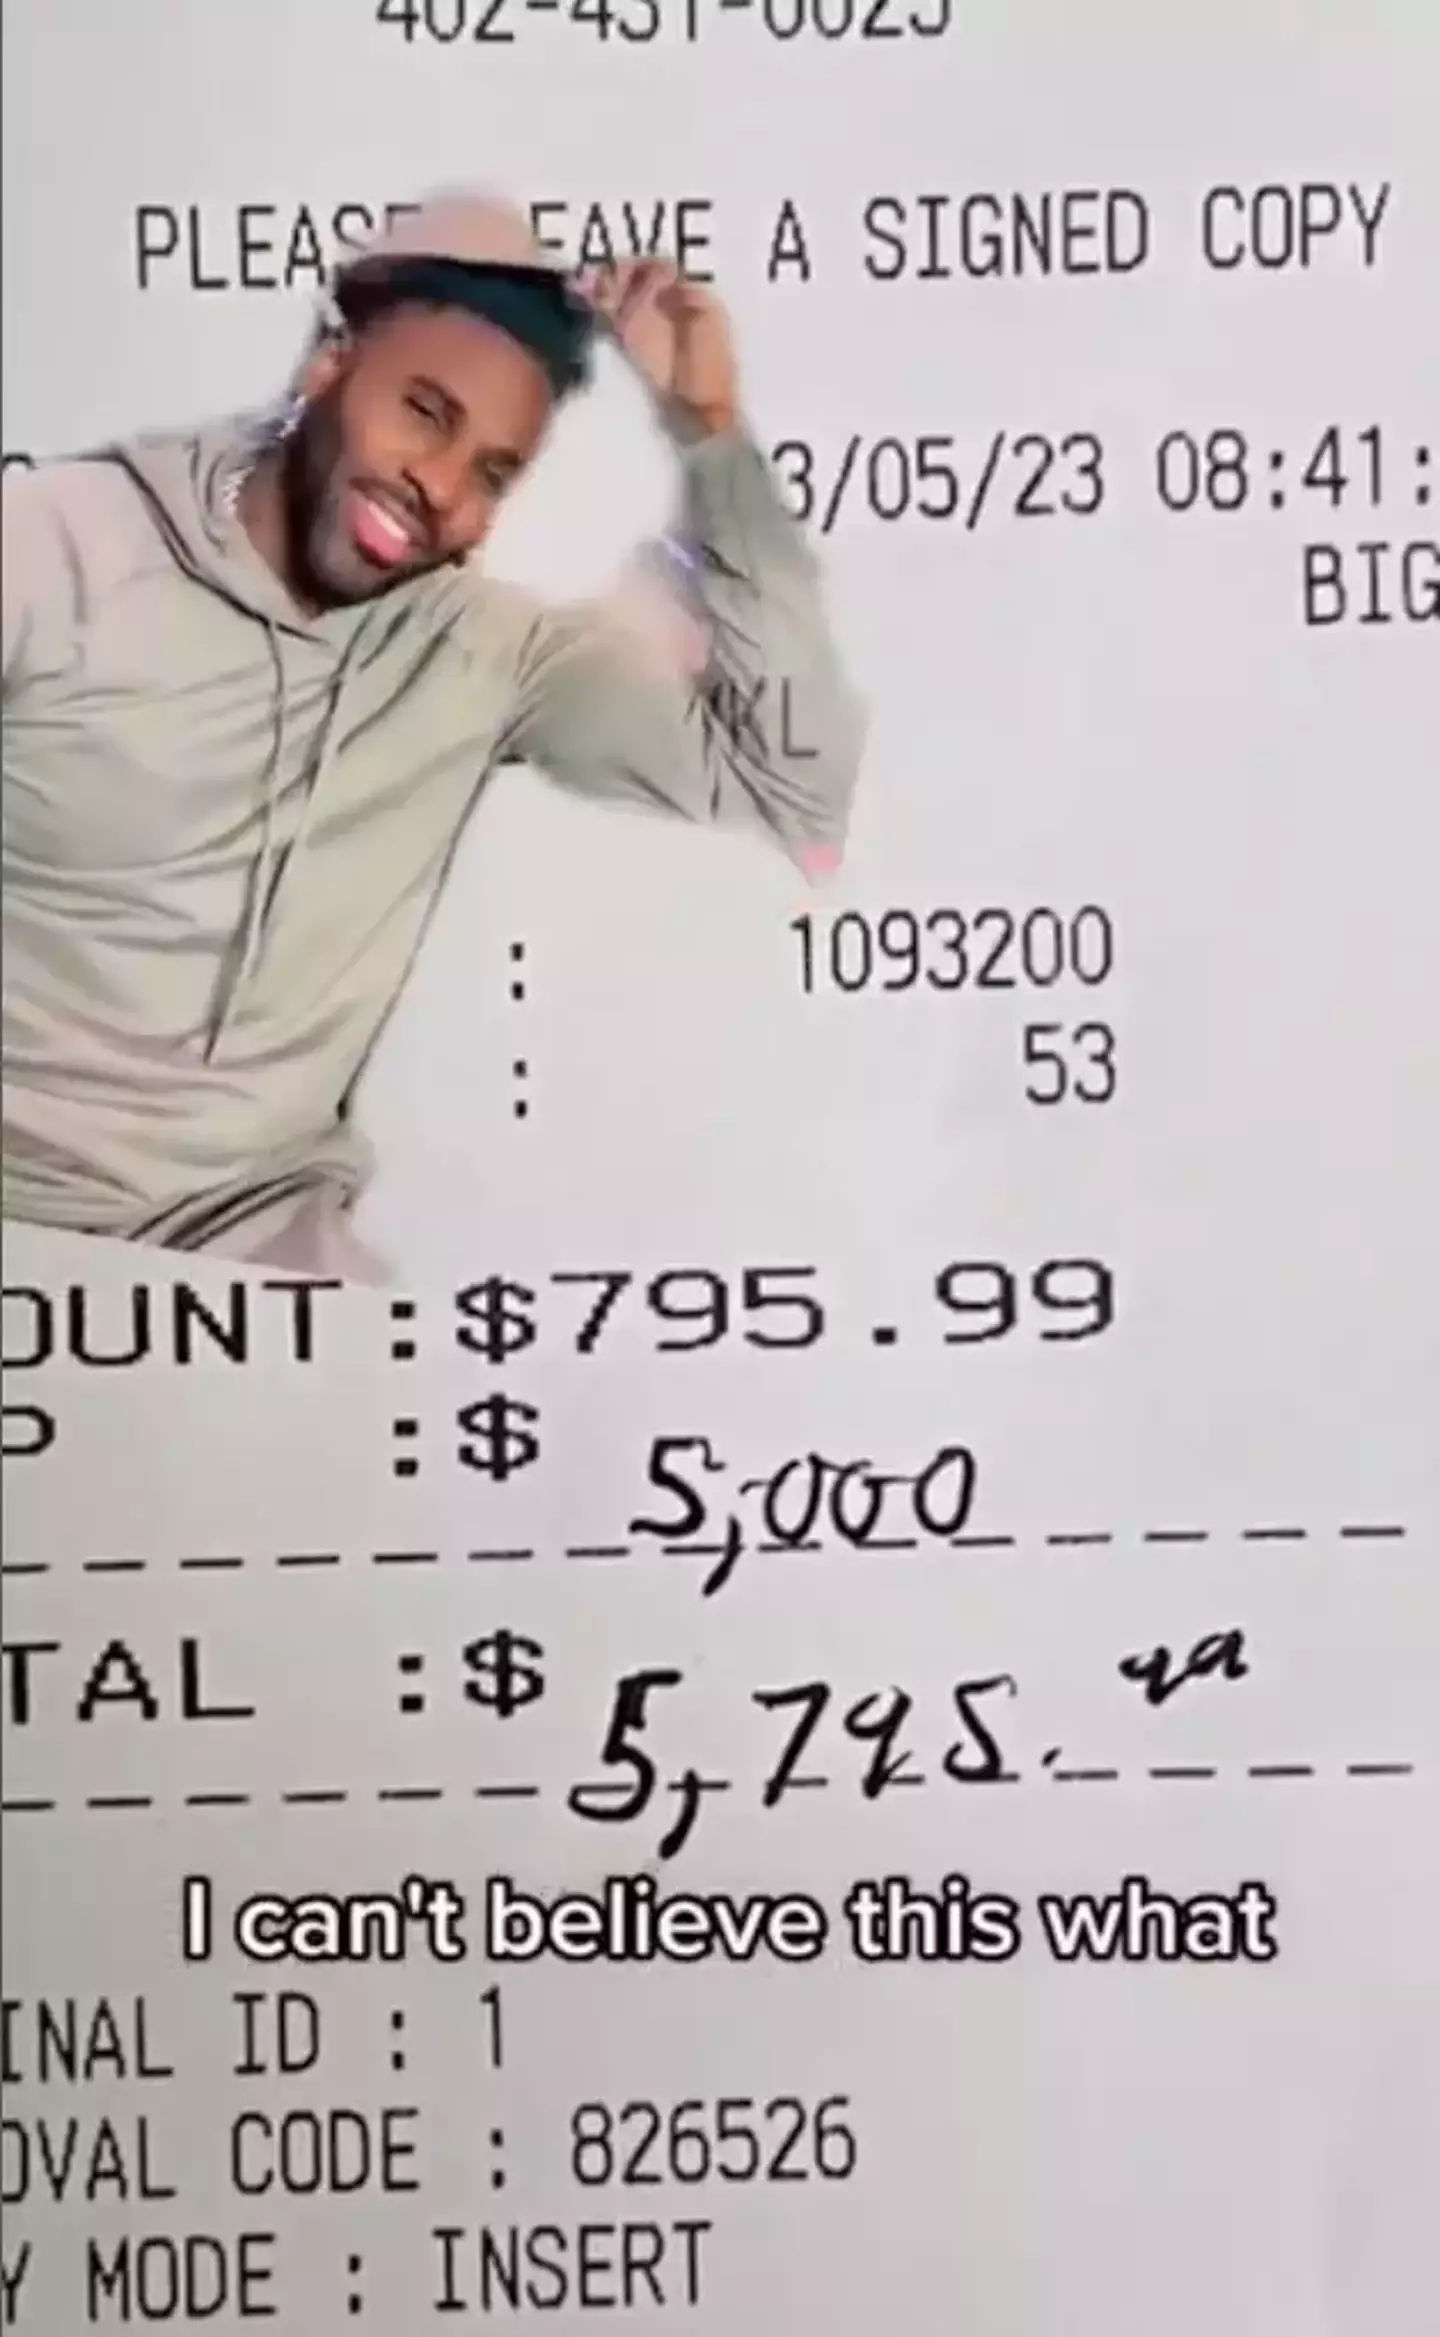 The waiter, named Jordan, is going to spend the money on his next semester of college.